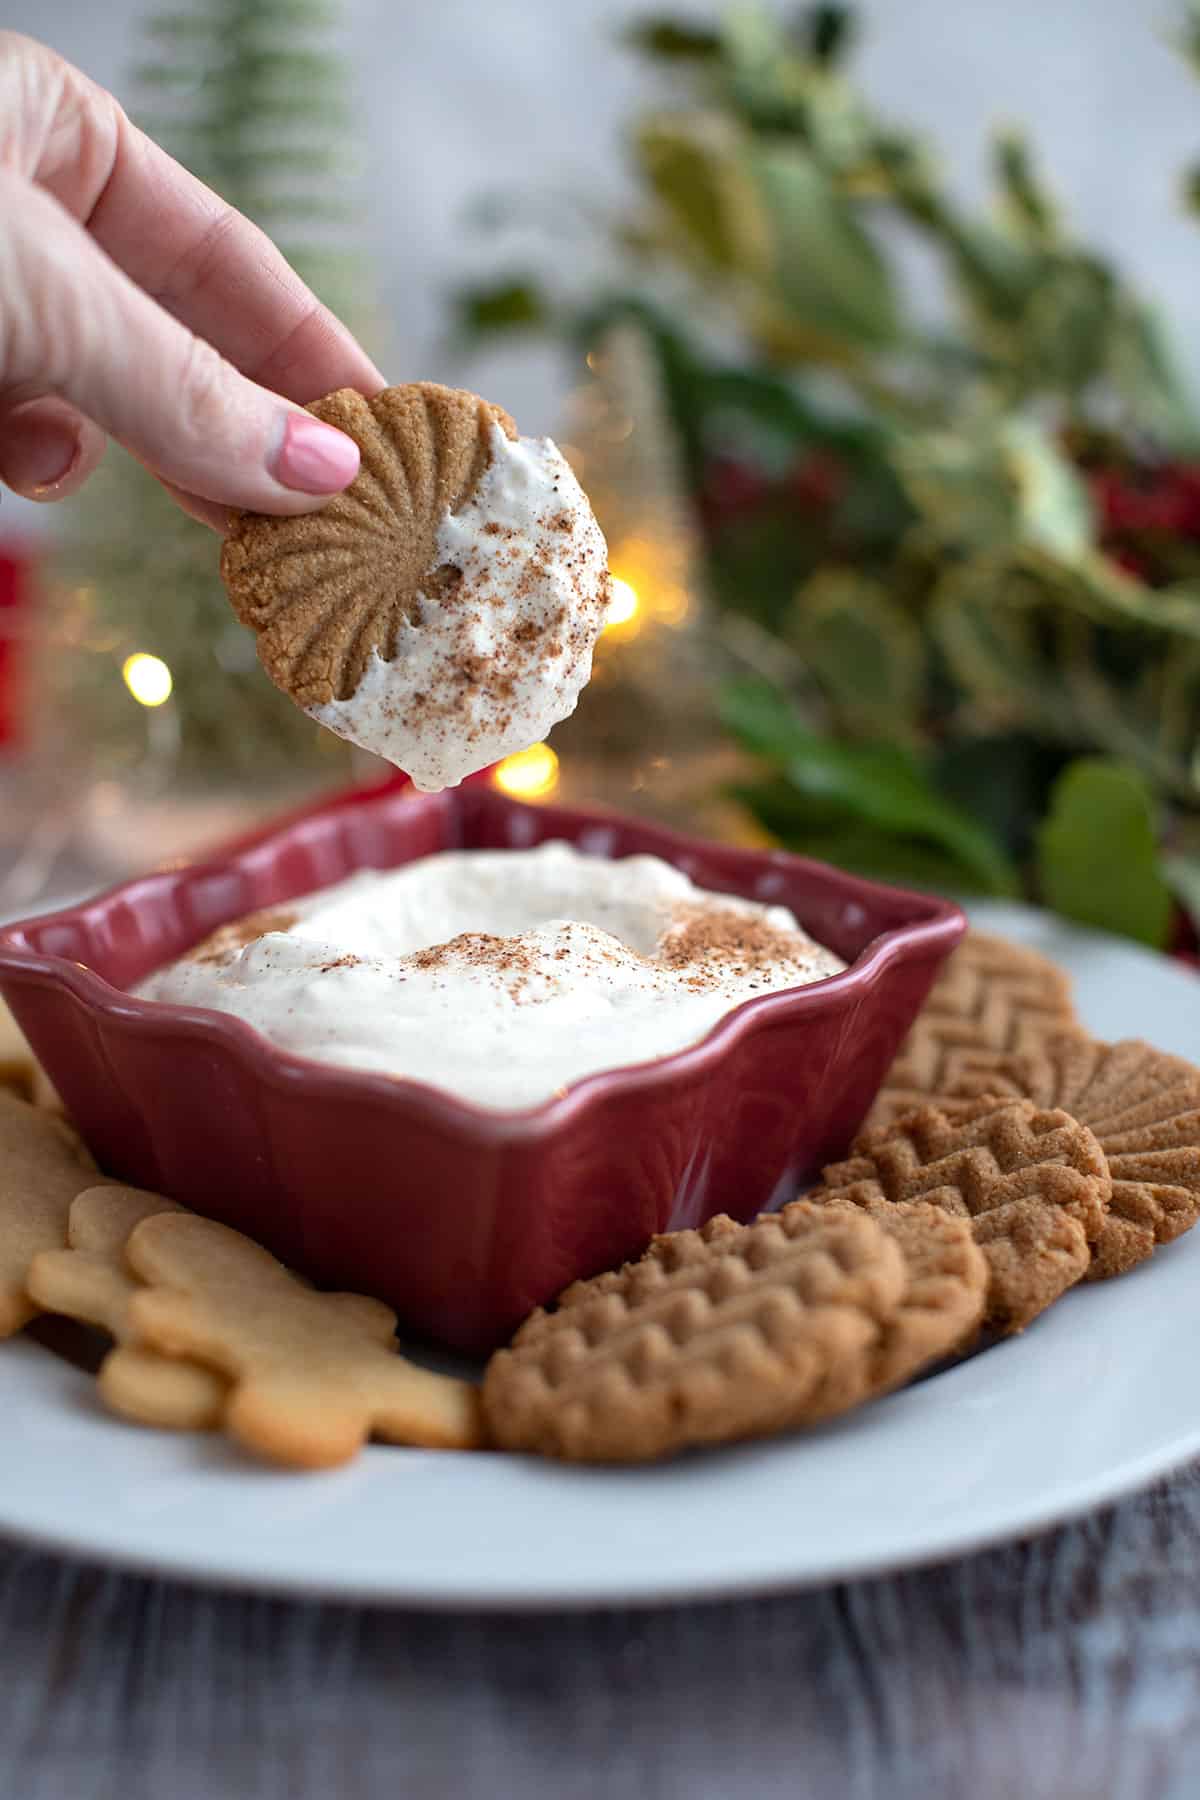 A hand holding a ginger cookie dipped in Keto Eggnog Dip.